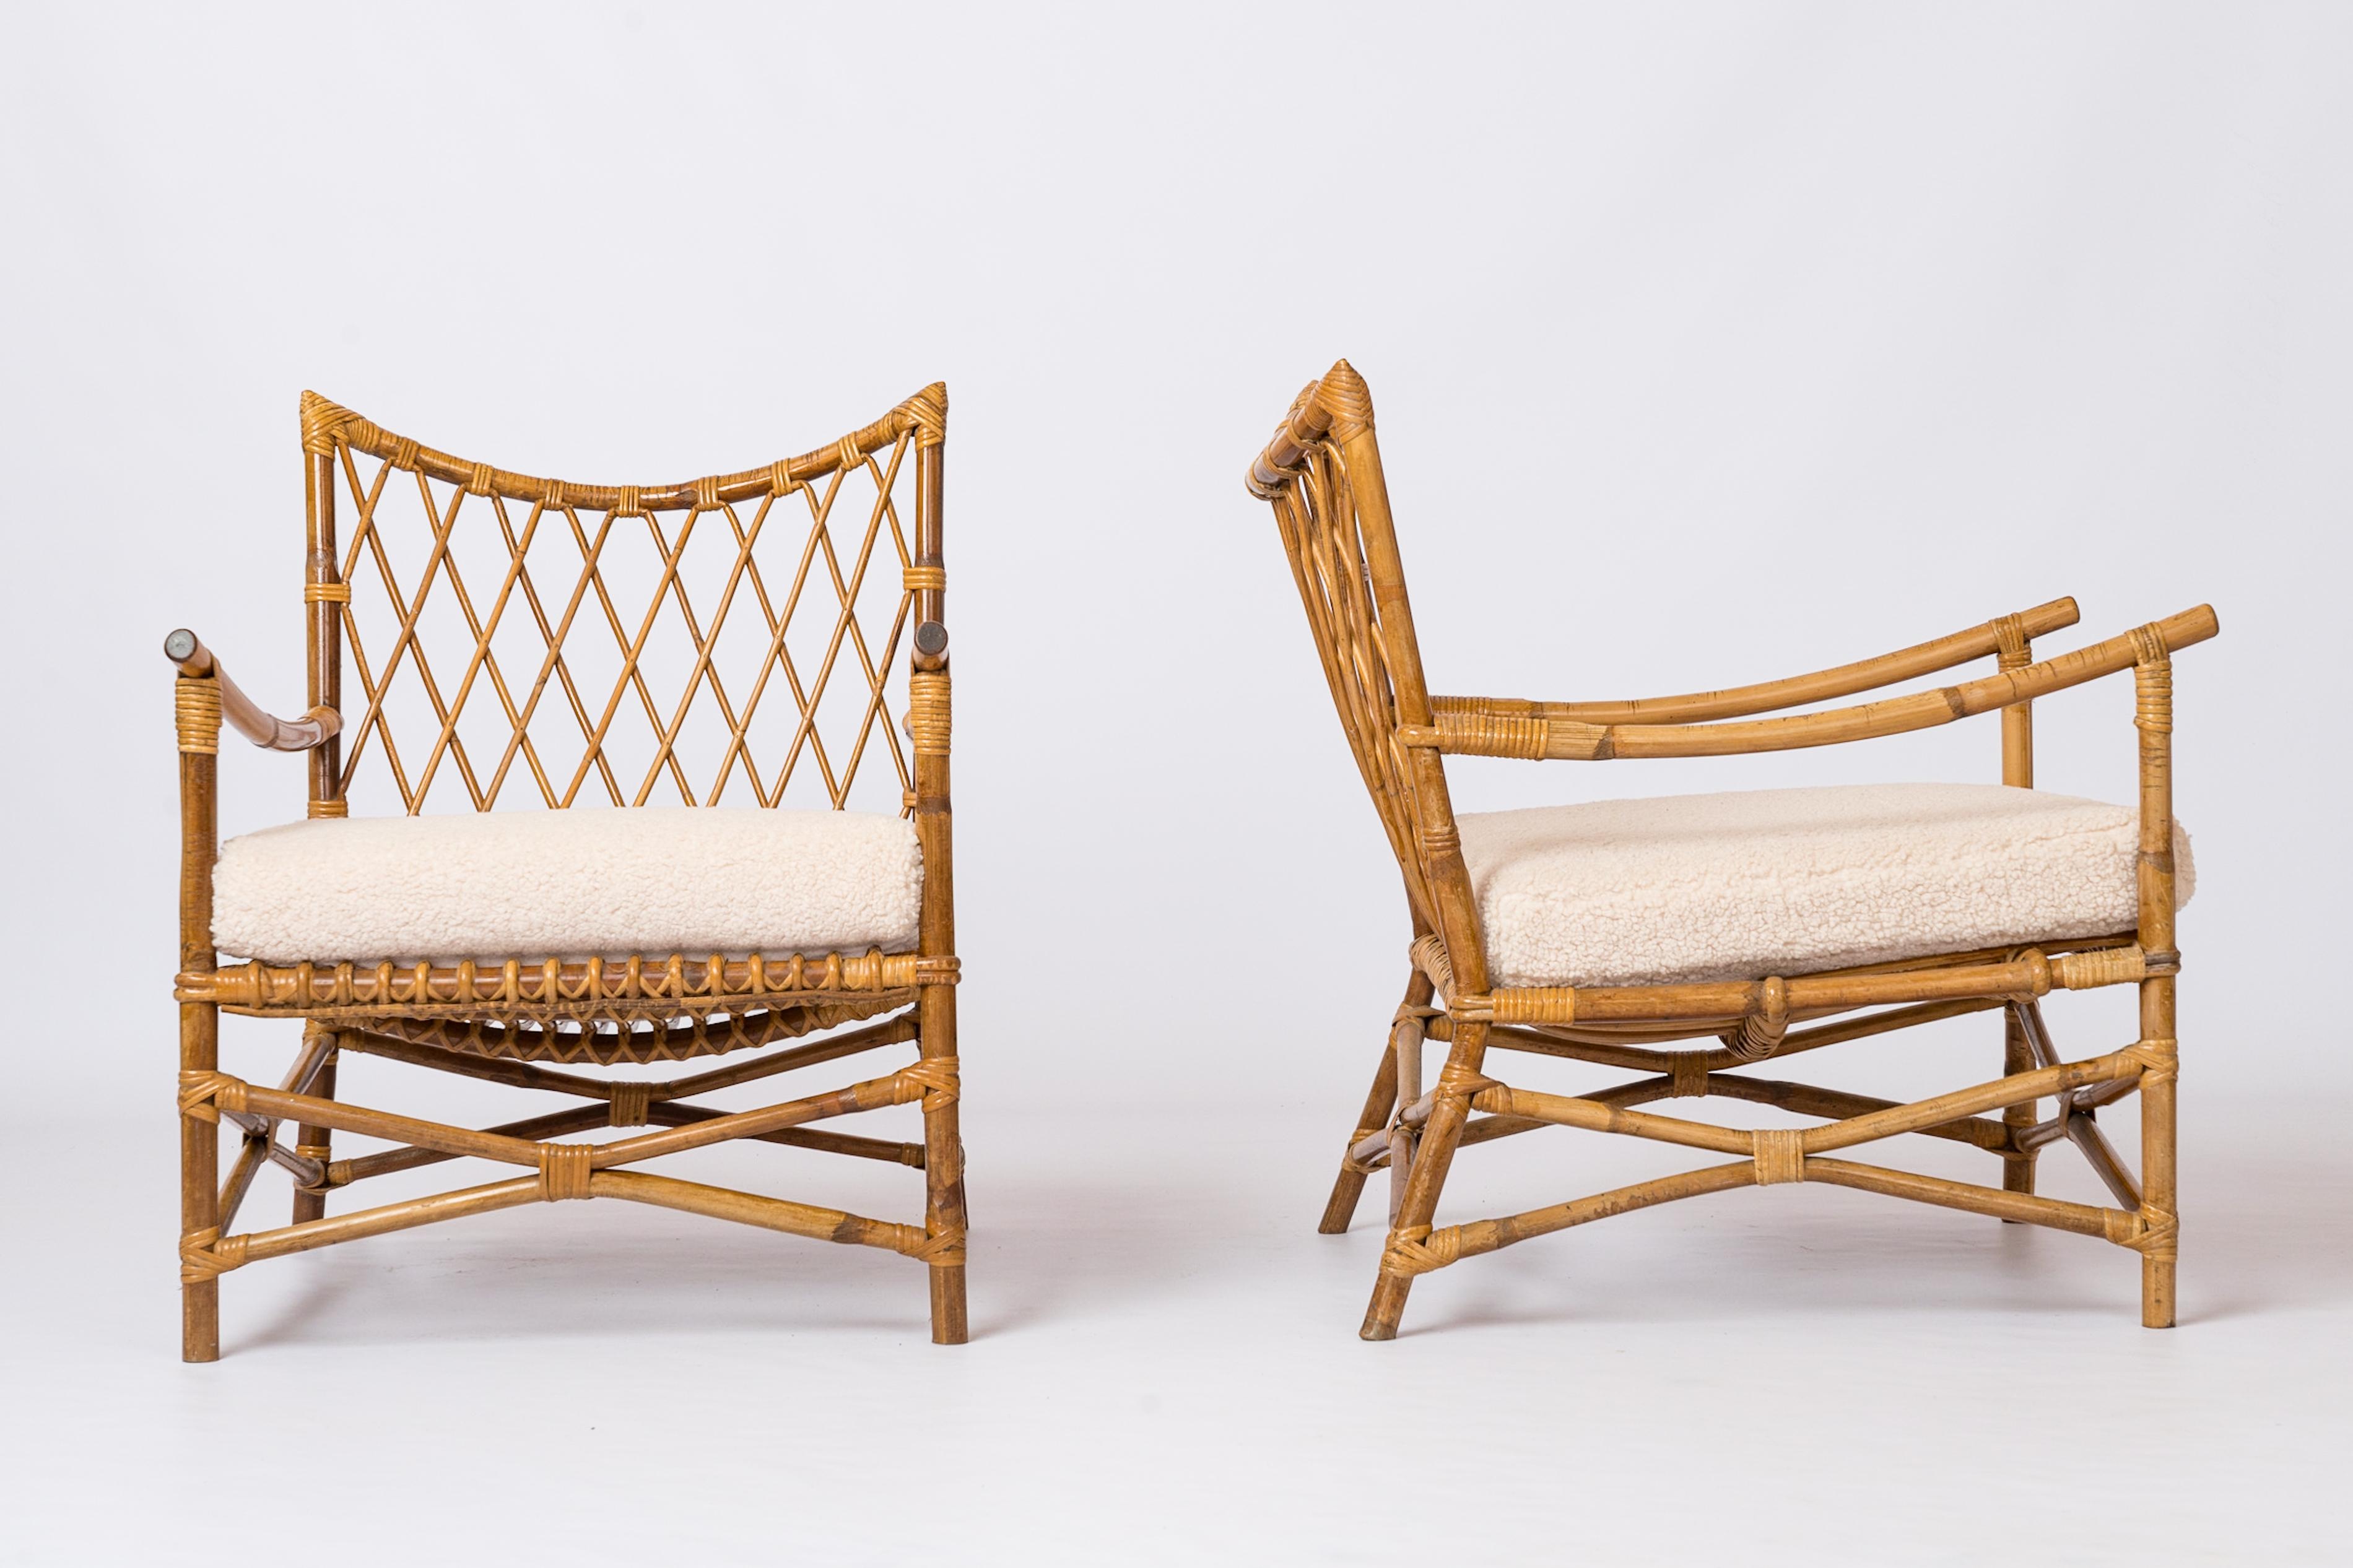 Elegant pair of low seating rattan loungers with made to measure off-white bouclé cushions. Braided back rest. In the style of Louis Sognot & Royère. 
Sturdy and comfortable. Seat height ranges from 29cm to 20cm at lowest point.
These chairs will